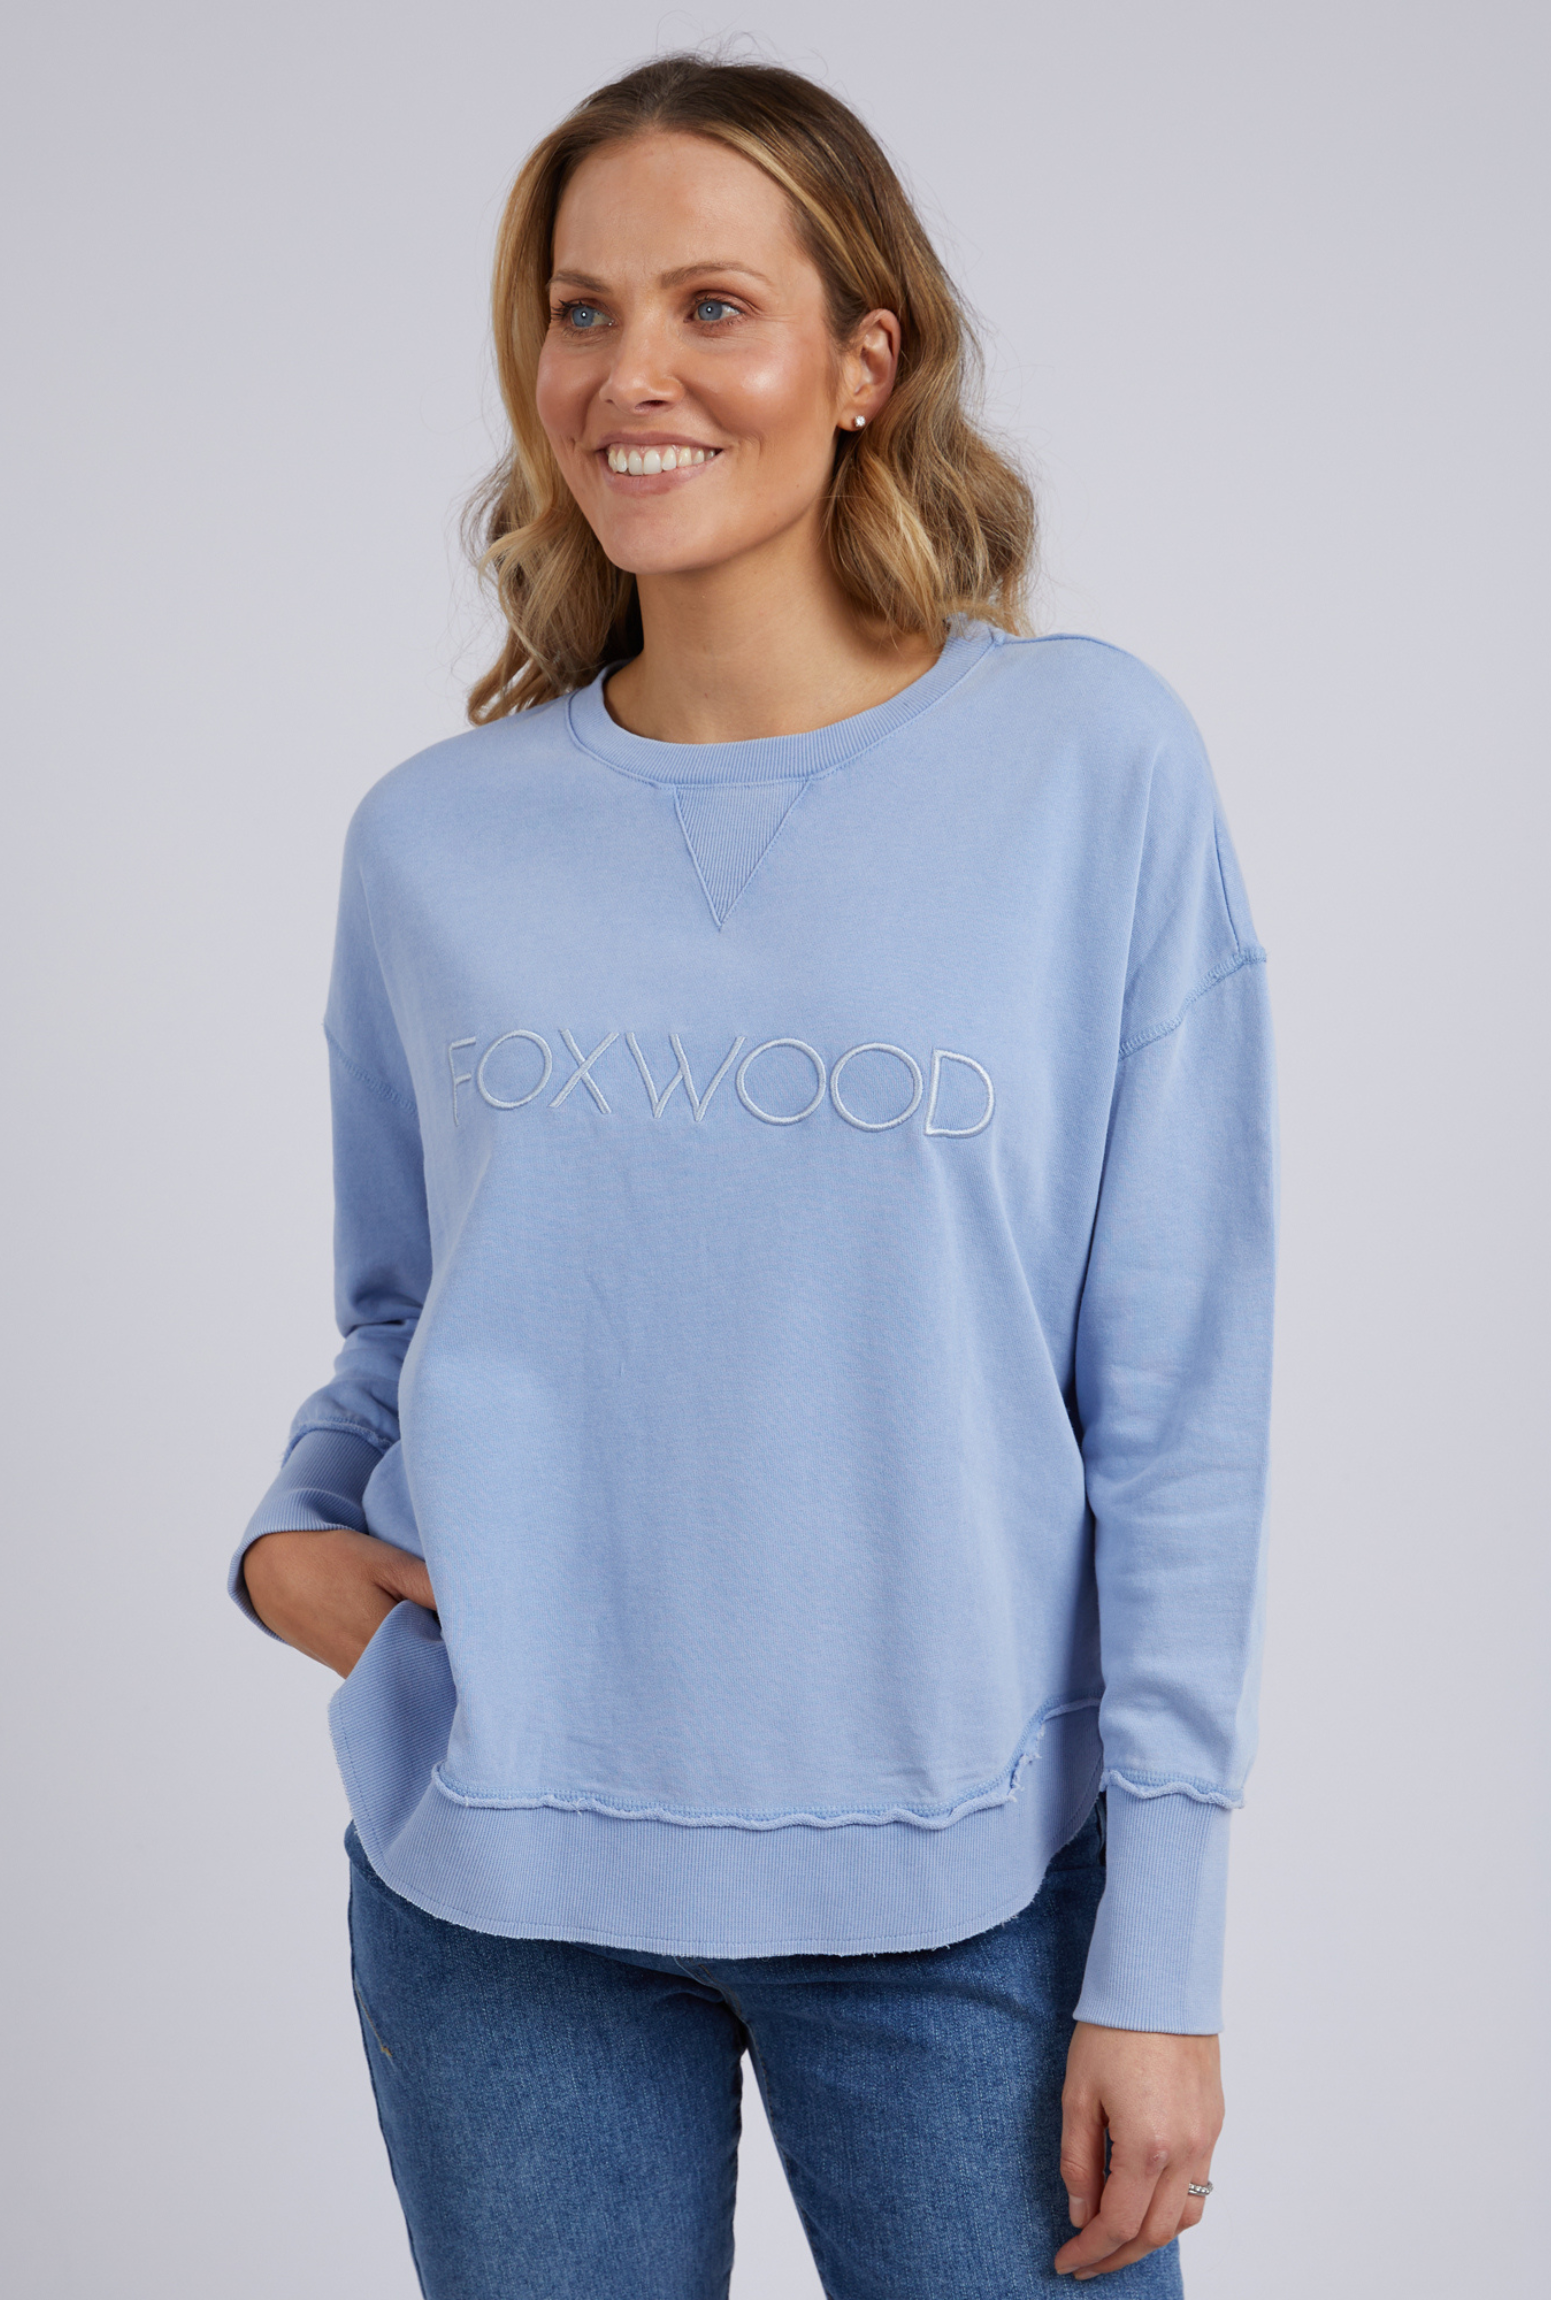 Foxwood Washed Simplified Crew - Light Blue